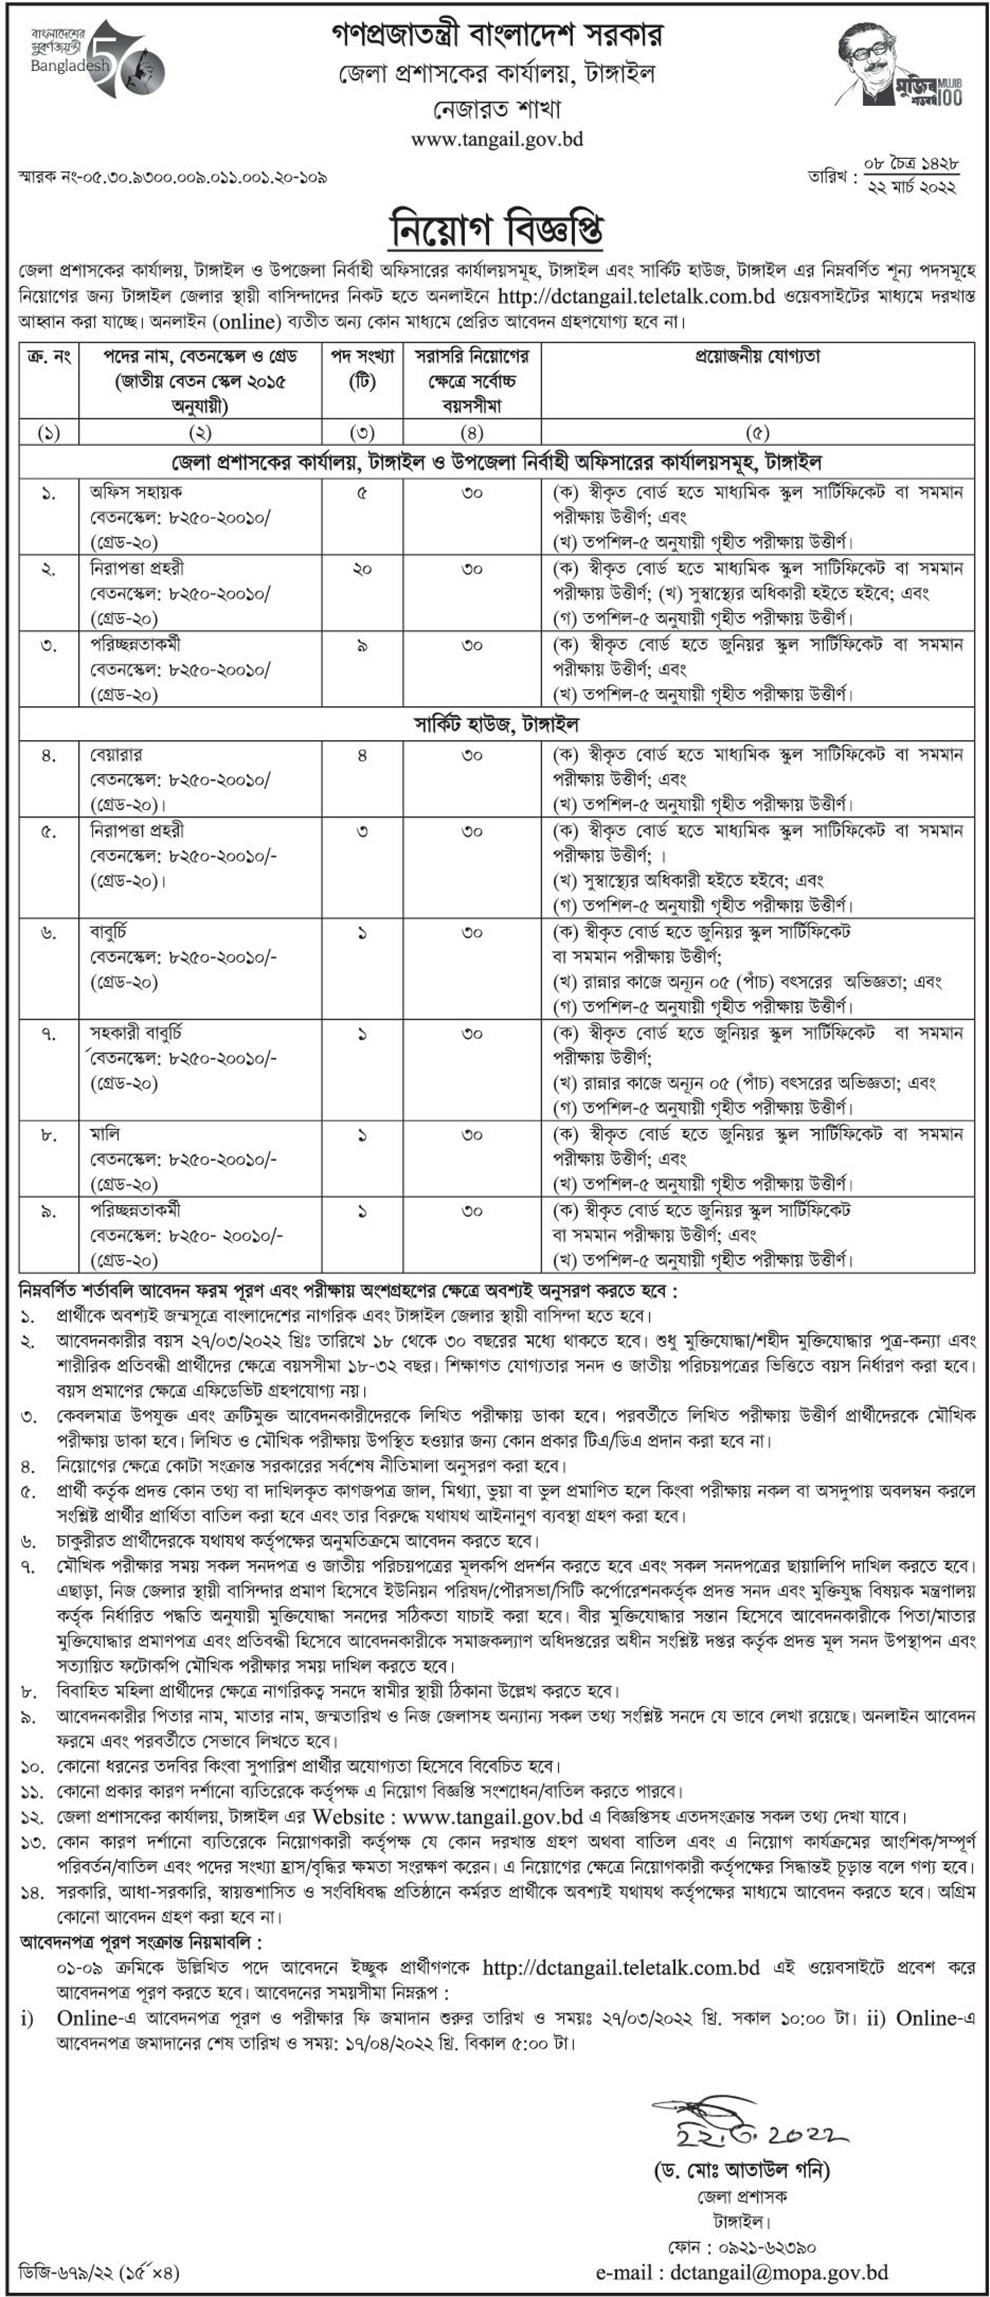 office-of-district-commissioner-tangail-cook-jobs-bdjobstoday